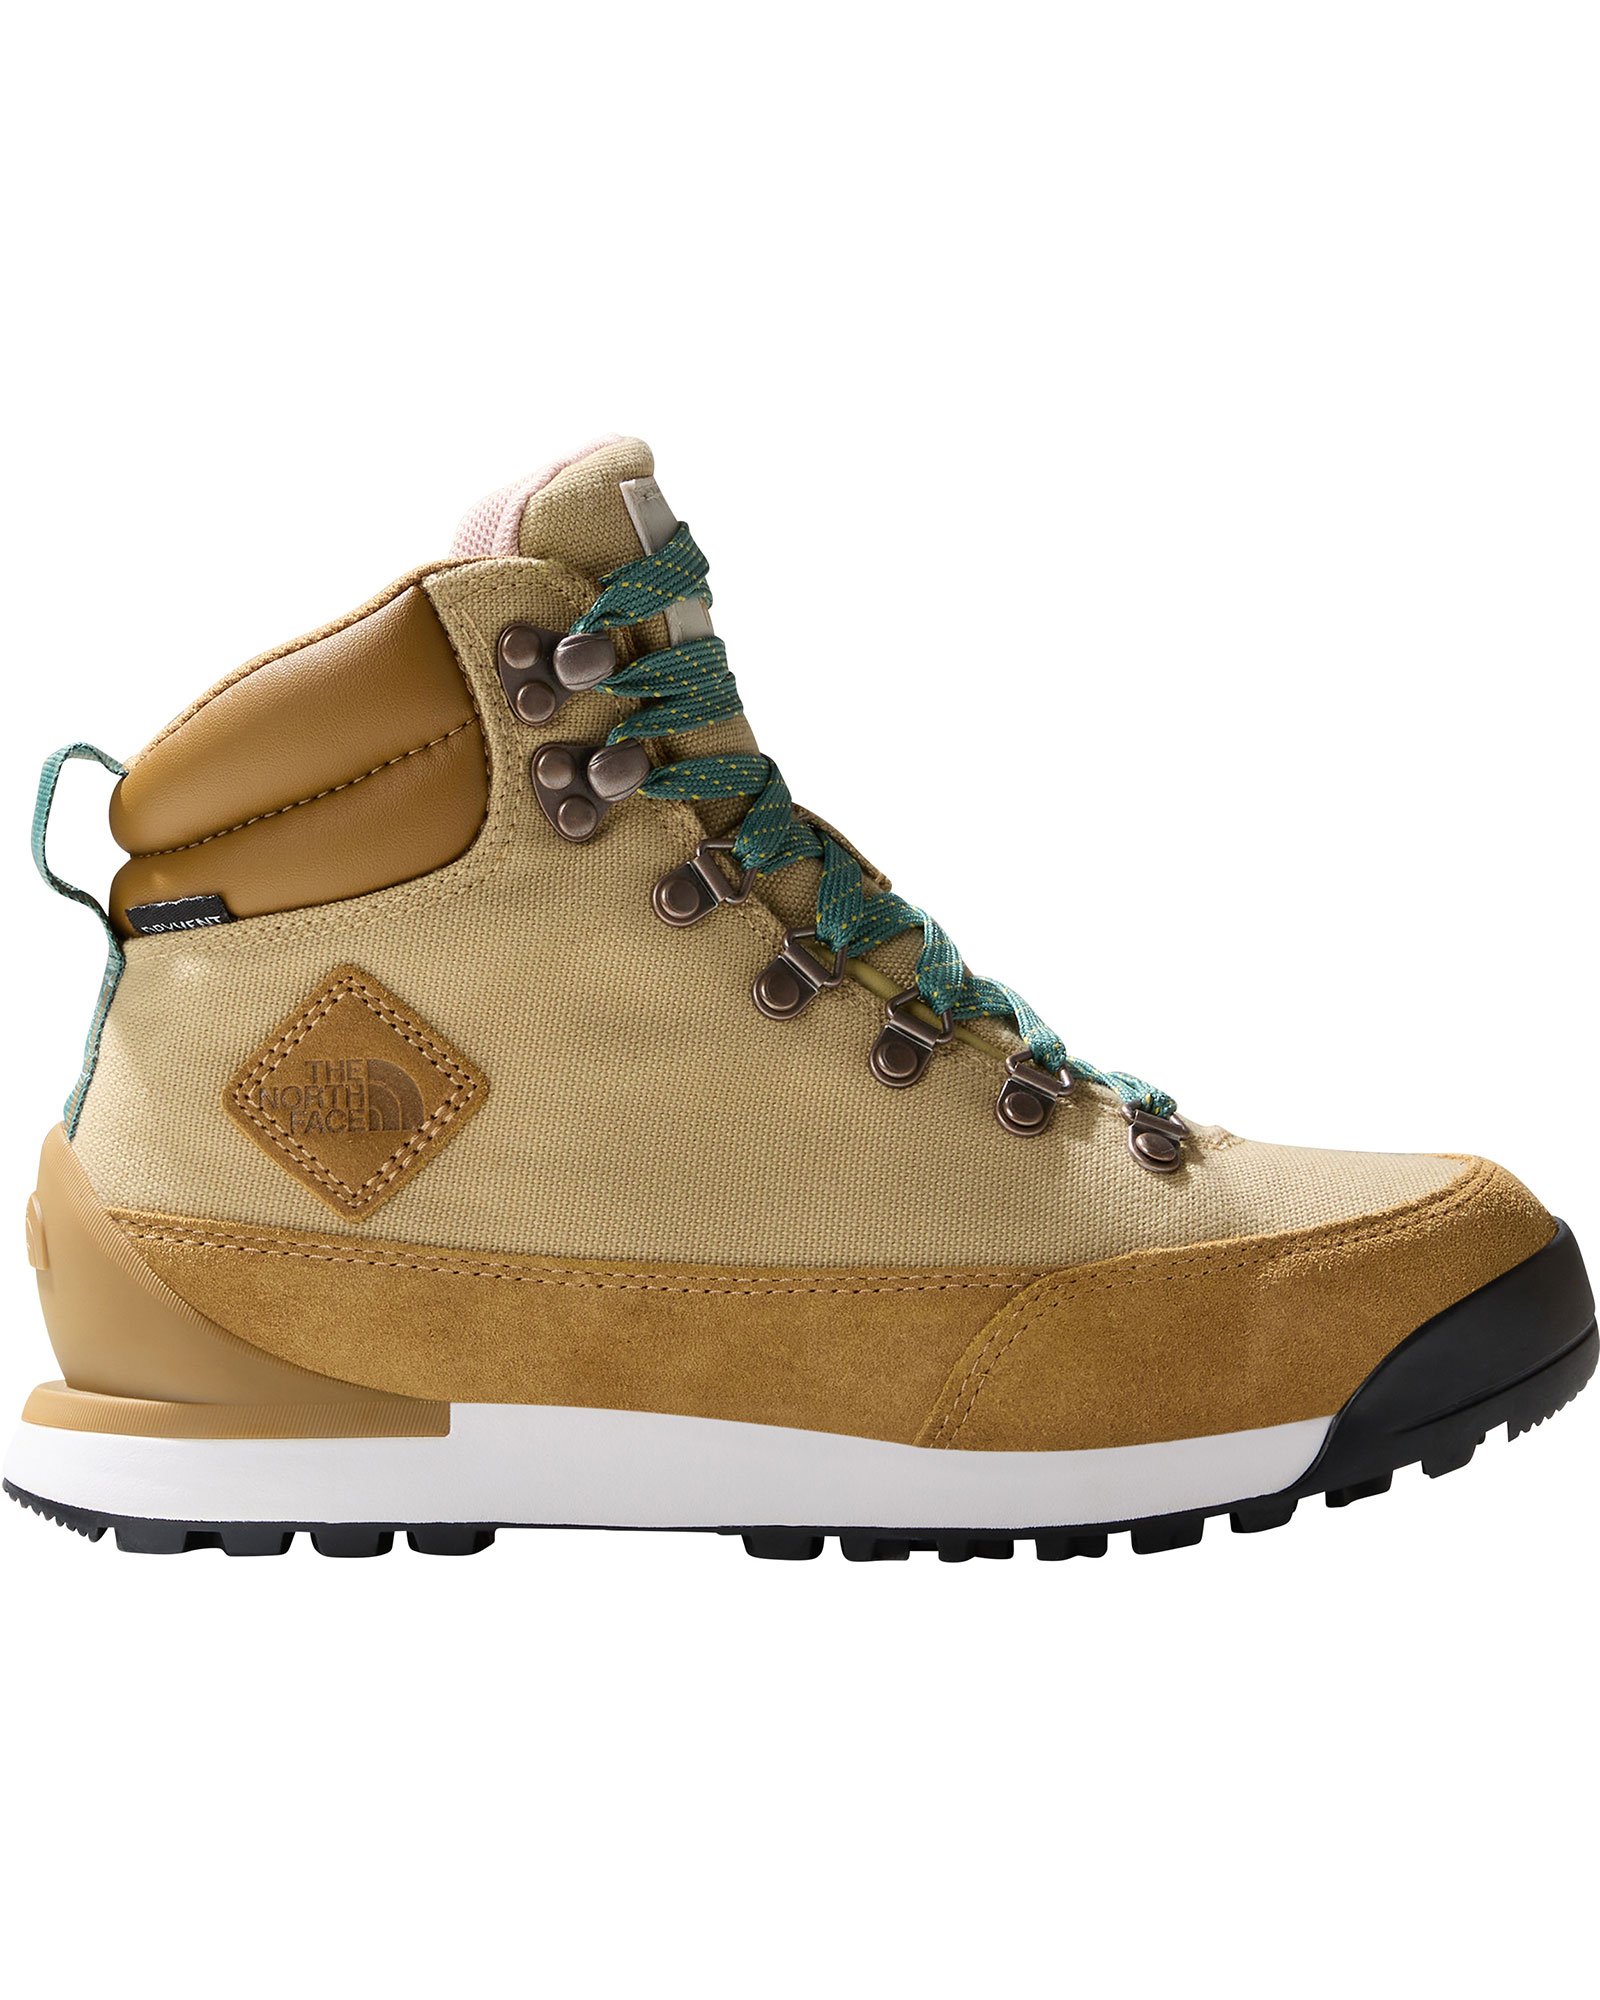 The North Face Back to Berkeley IV Textile Waterproof Women’s Boots - Khaki Stone/Utility Brown UK 4